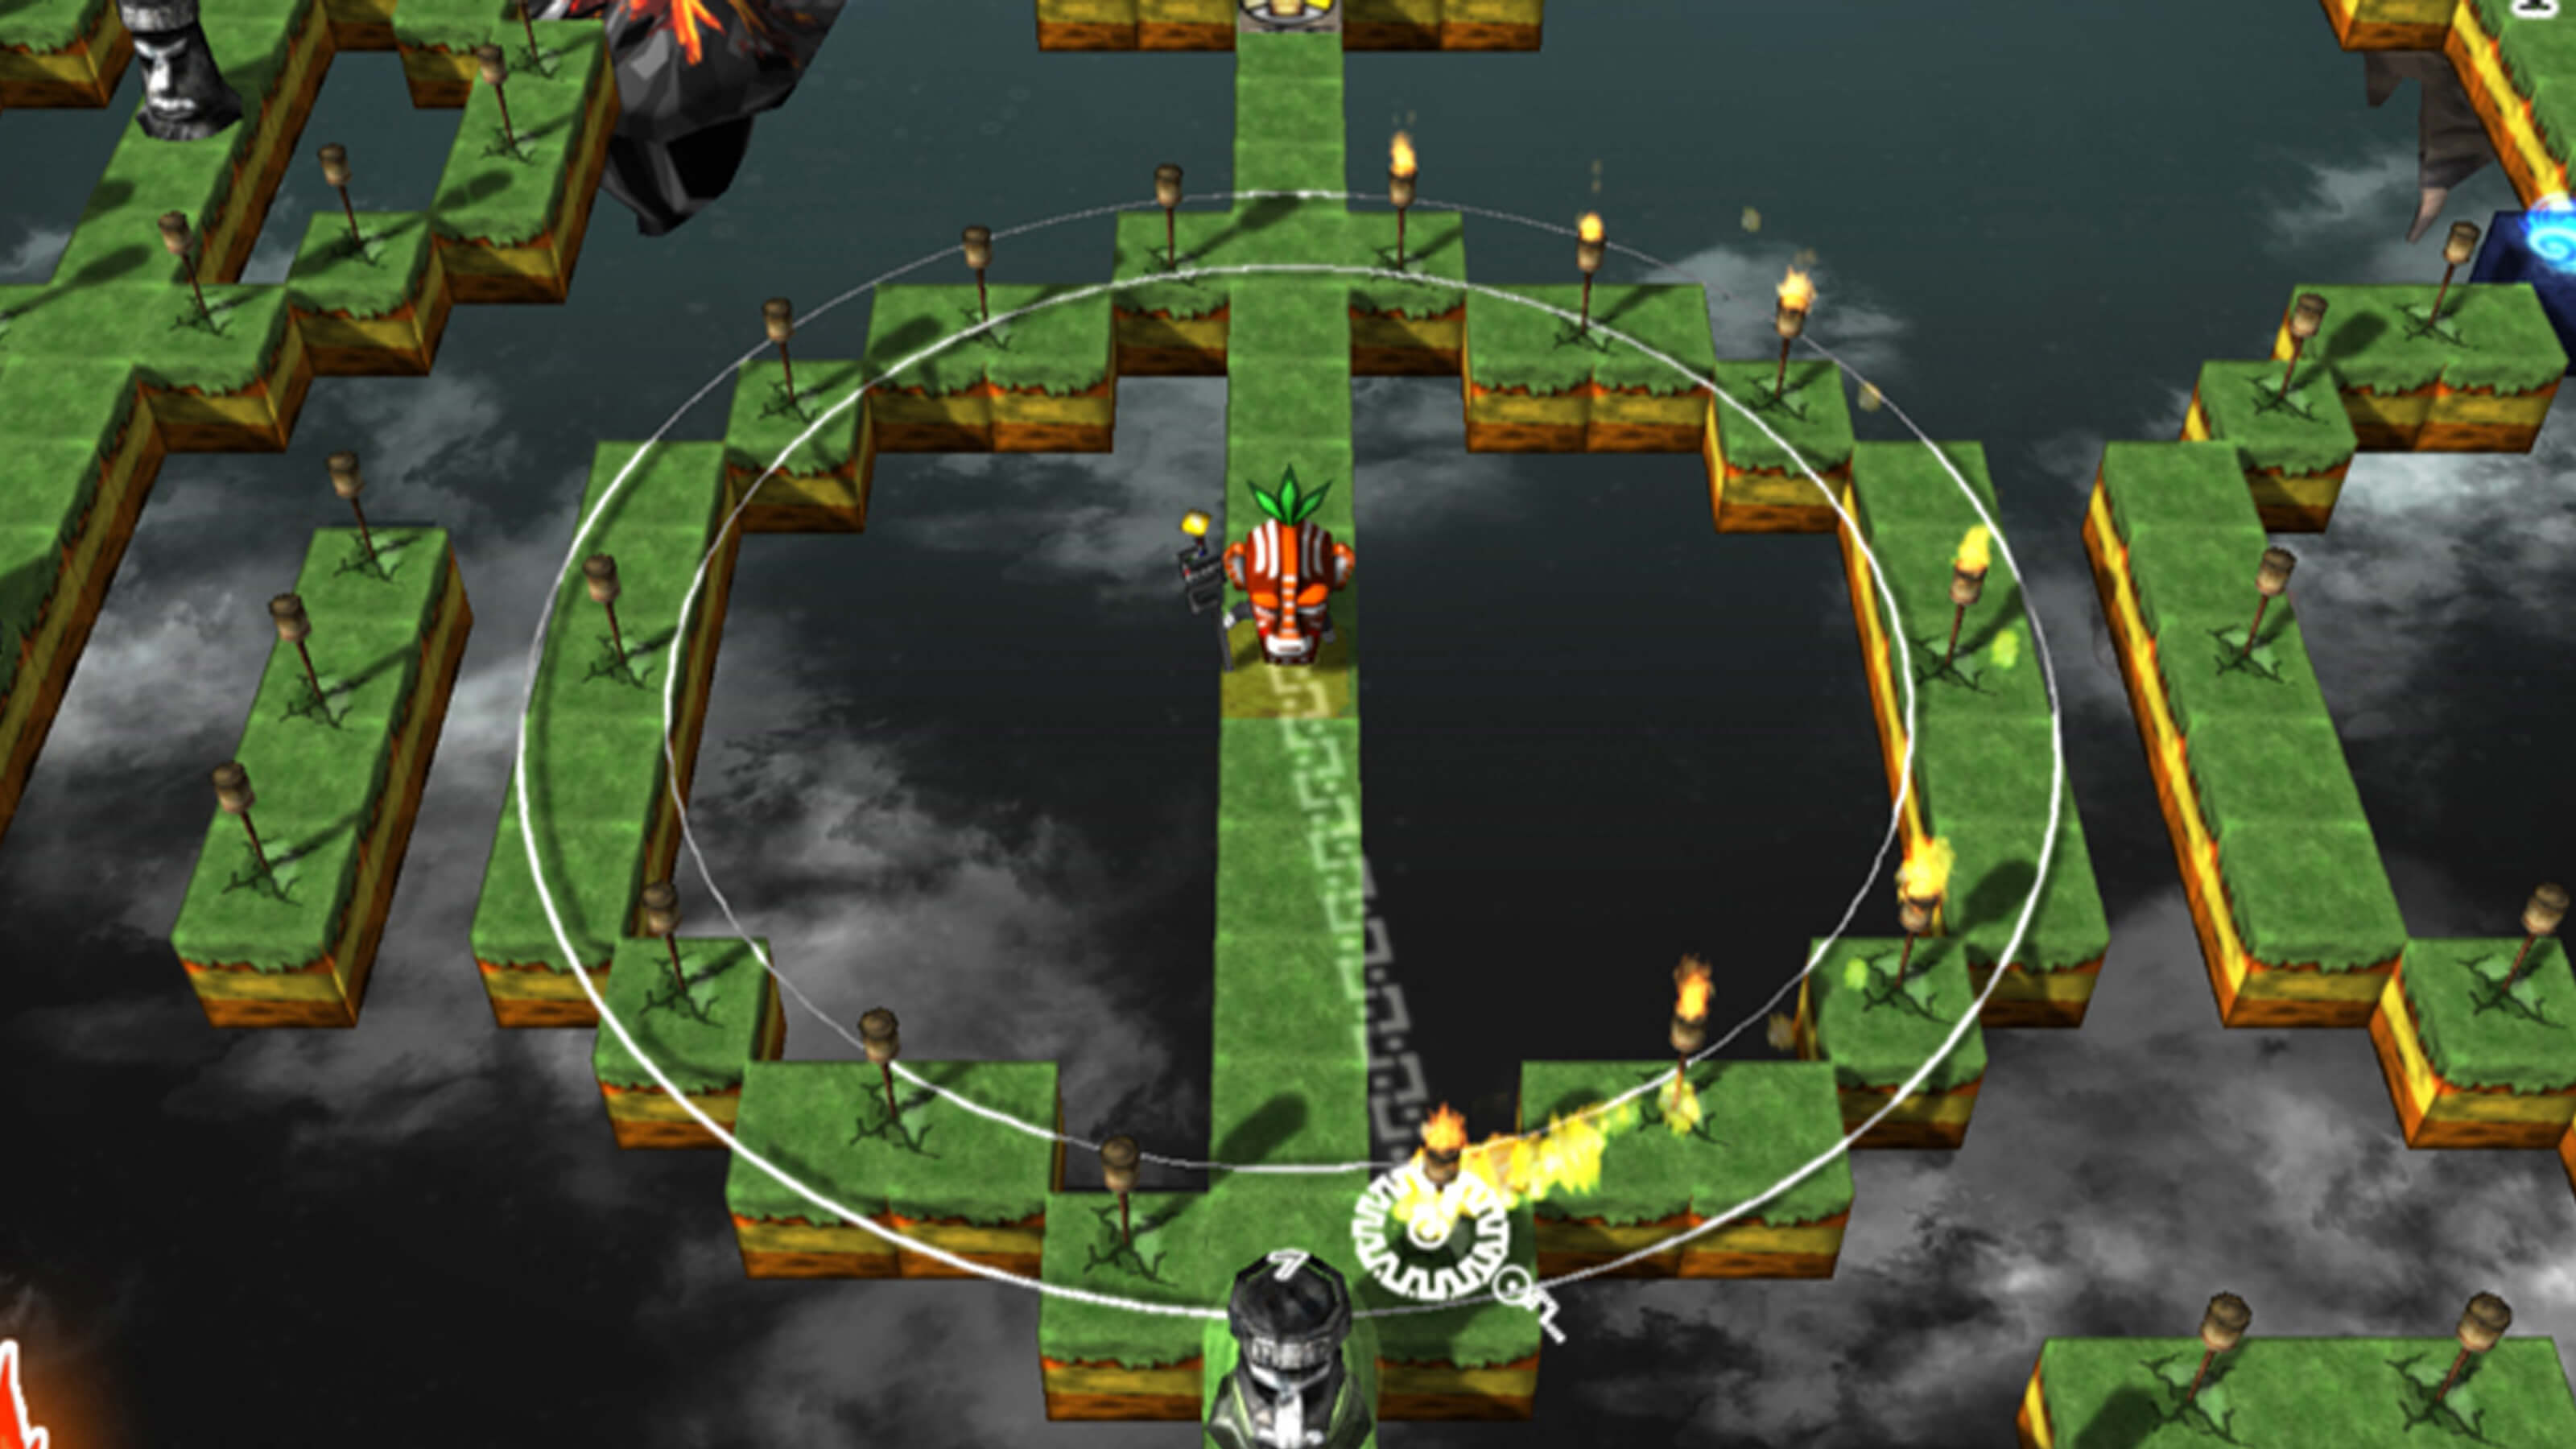 The player's character stands at the center of a single-block row and is lighting torches arranged in a circle around itself